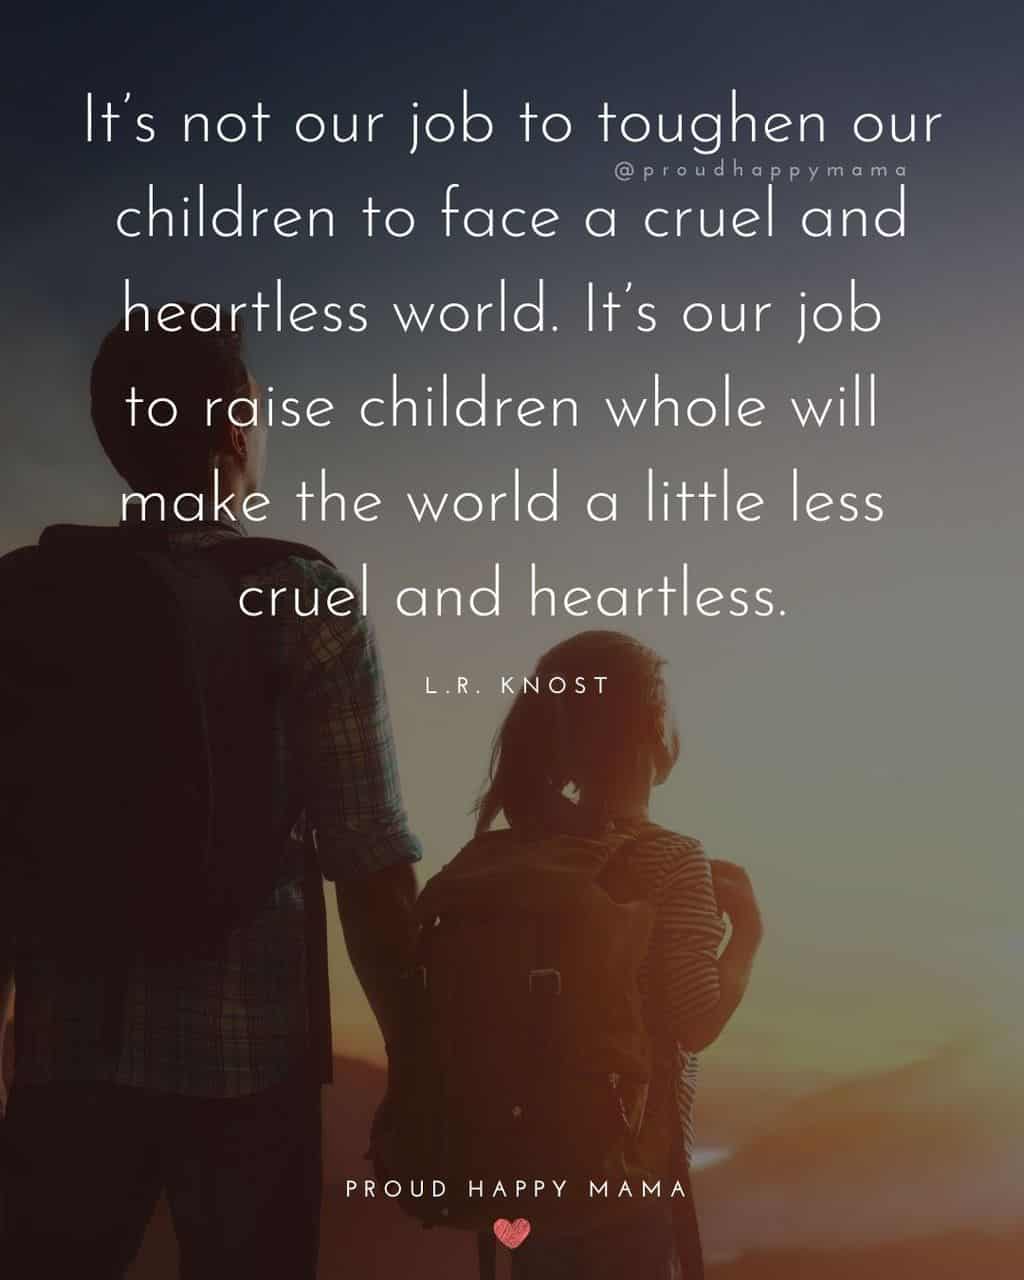 Parenting Quotes - It’s not our job to toughen our children to face a cruel and heartless world. It’s our job to raise children whole will make